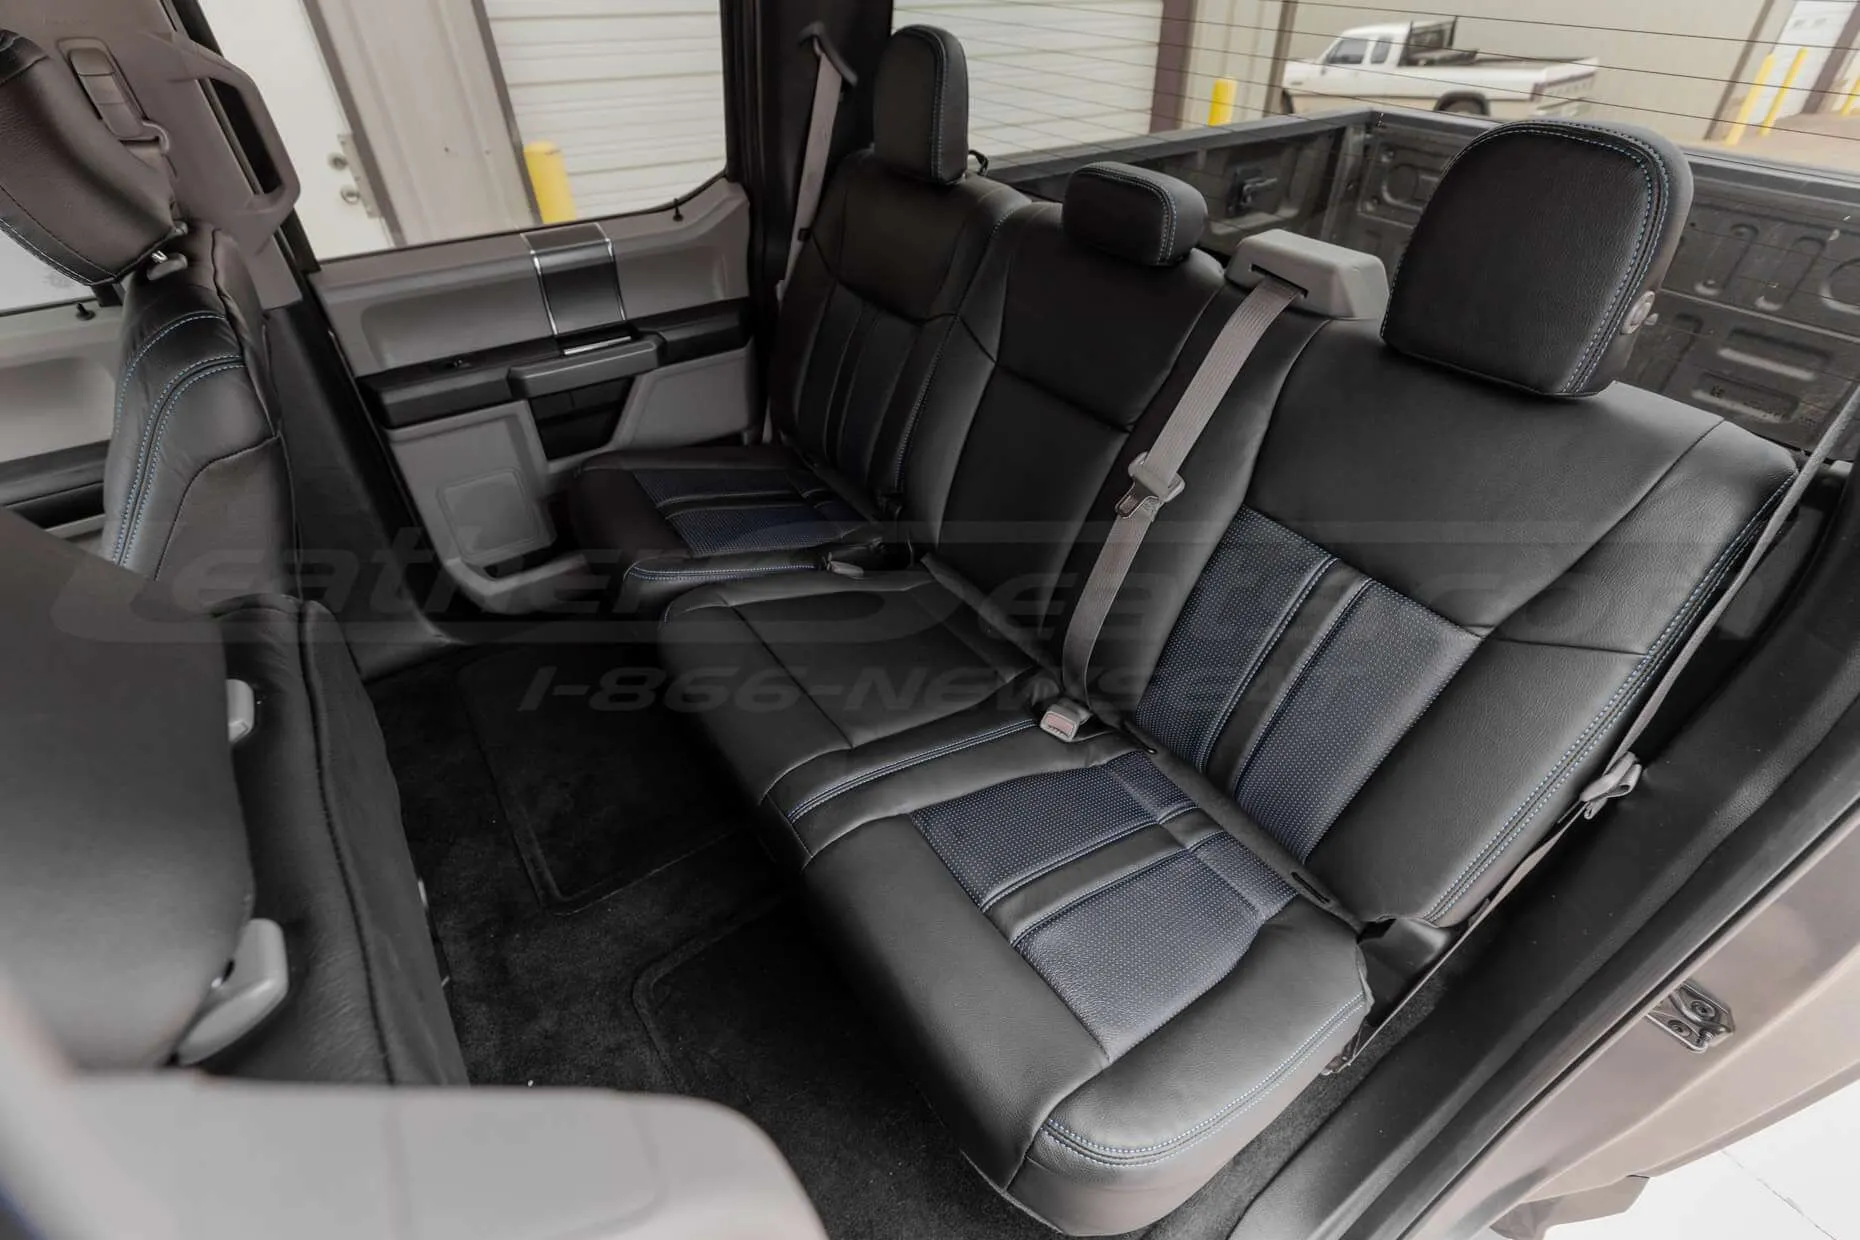 2015-2020 Ford F-150 with Black and Piazza Blue leather seats - Rear seats drover side